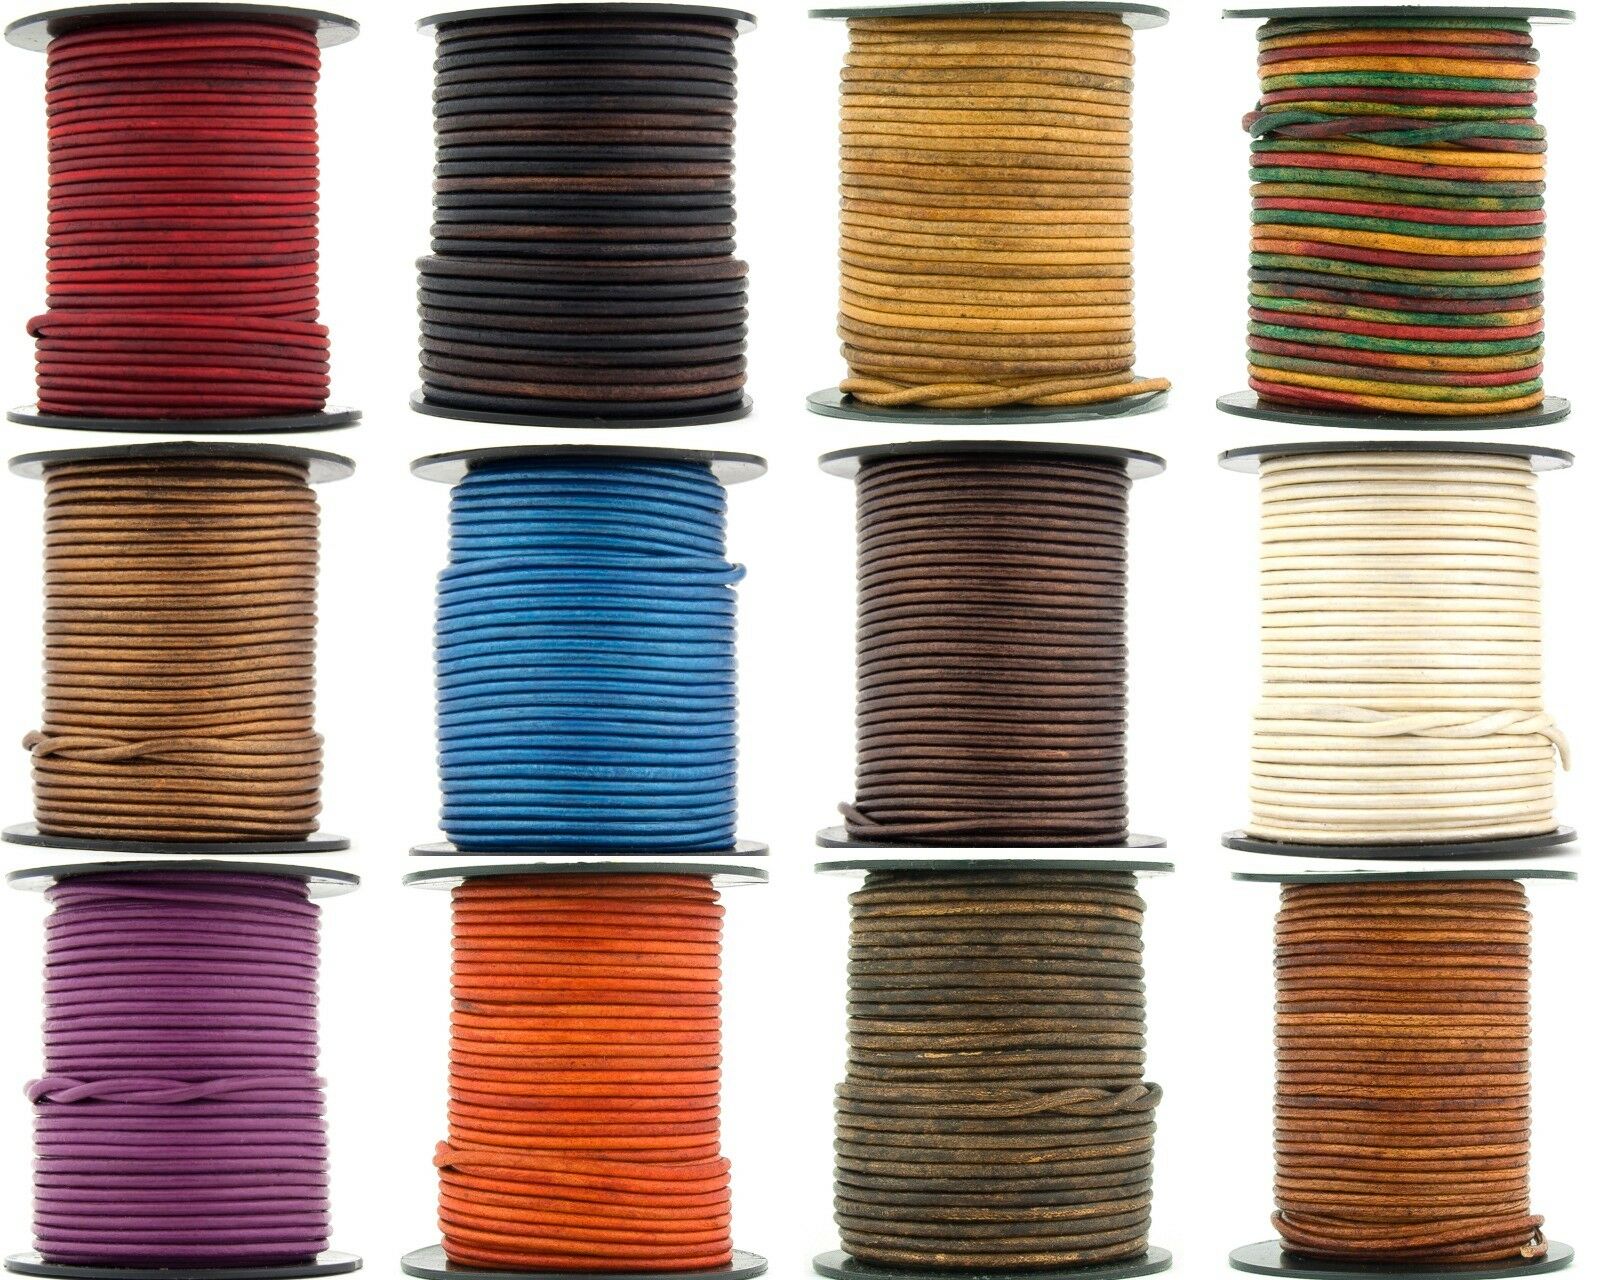 Xsotica® Round Leather Cord 10 Feet Over 65 Colors Available